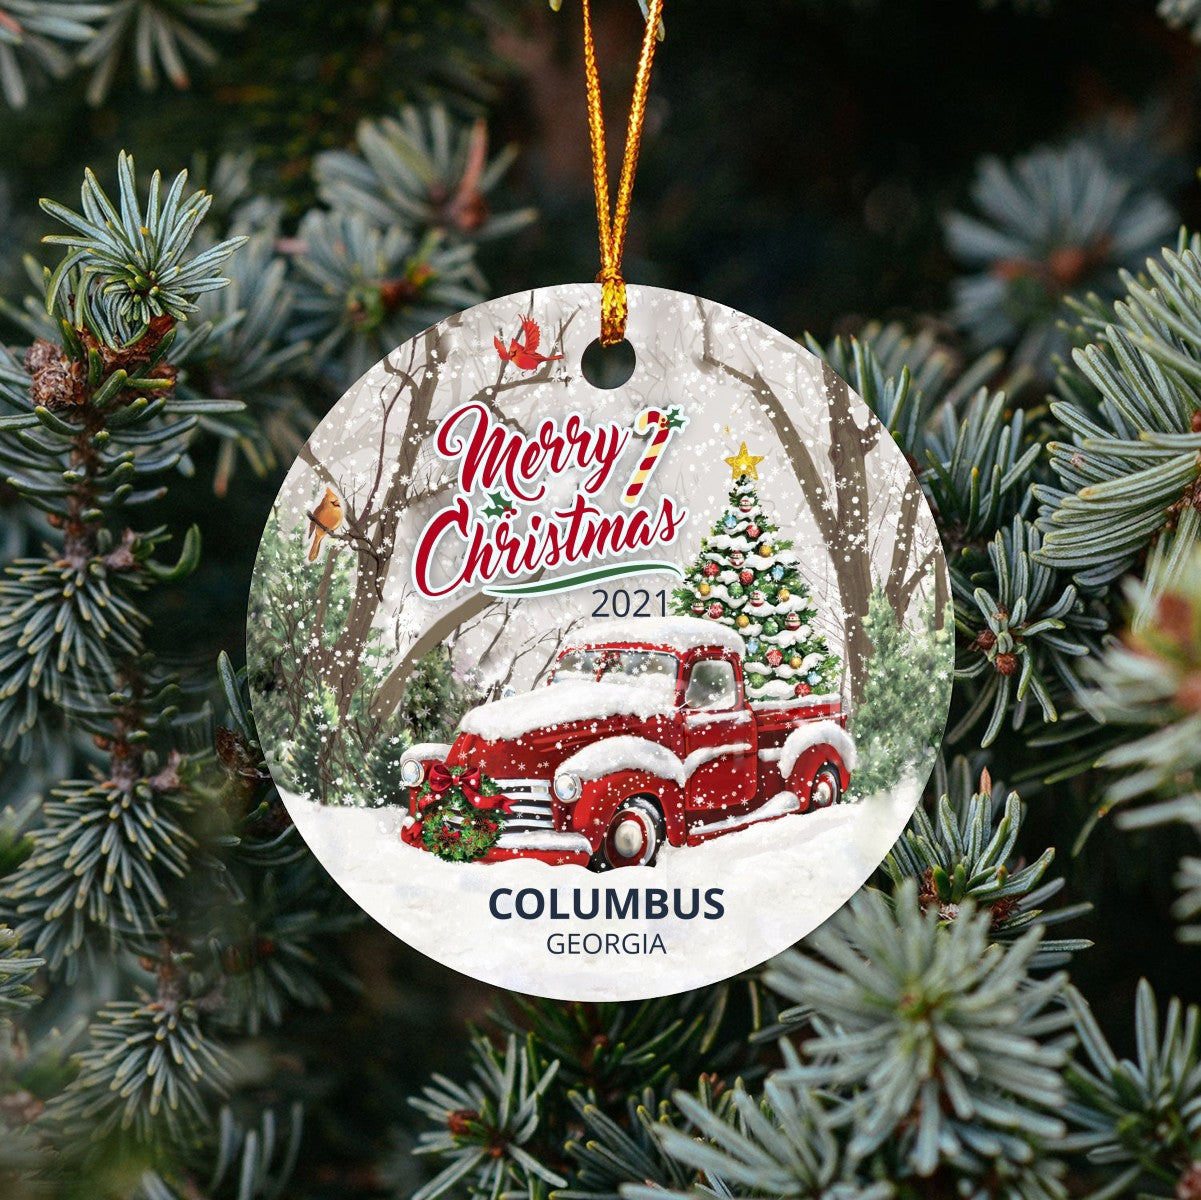 Christmas Tree Ornaments Columbus - Ornament Customize With Name City And State Columbus Georgia GA - Red Truck Xmas Ornaments 3'' Plastic Gift For Family, Friend And Housewarming